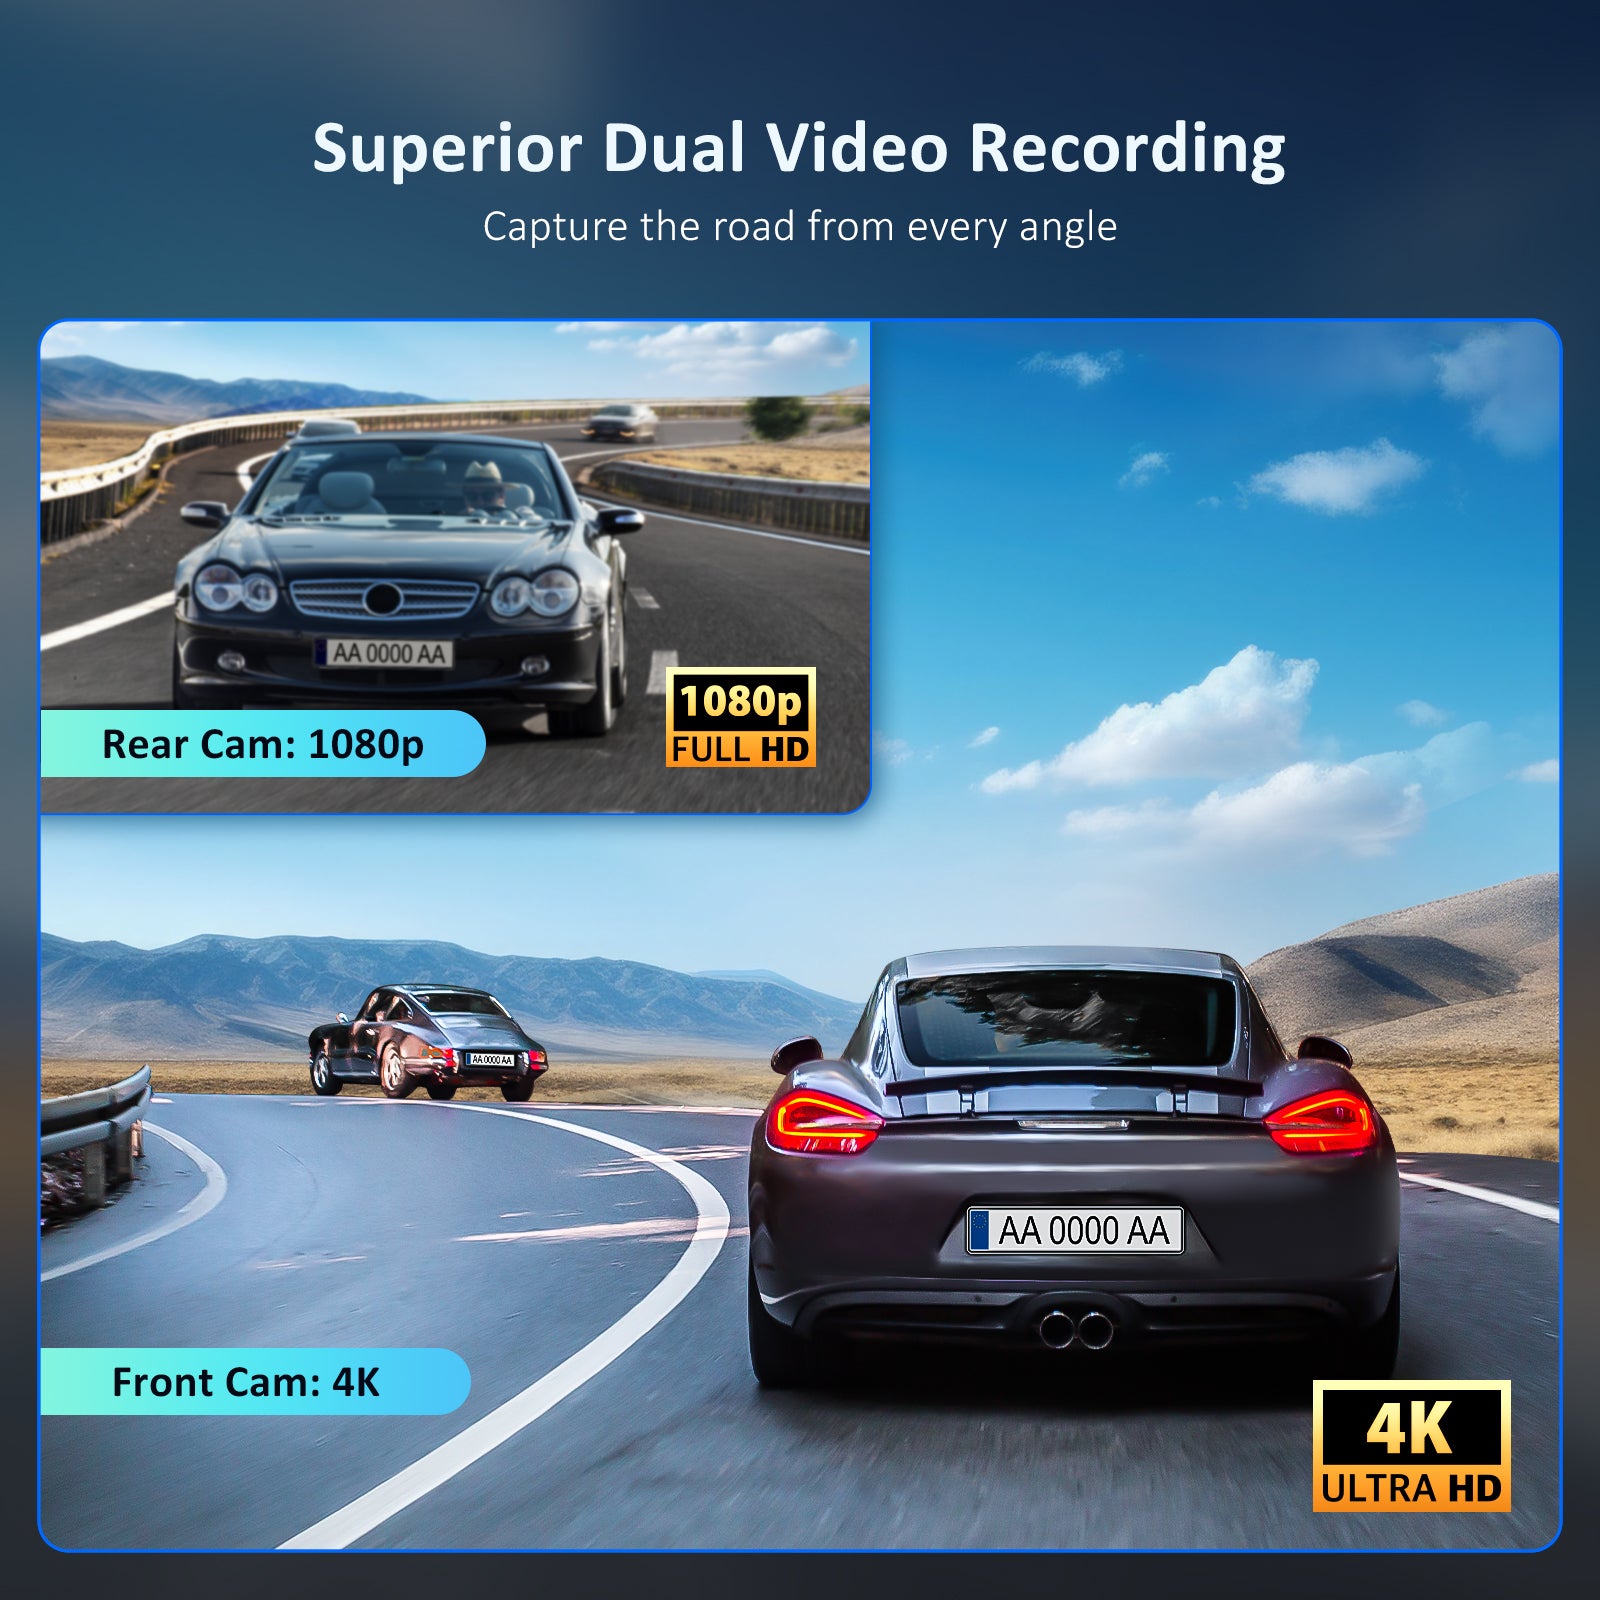 D90 Mirror Dash Cam offers 4K front and 1080p rear video recording capabilities.